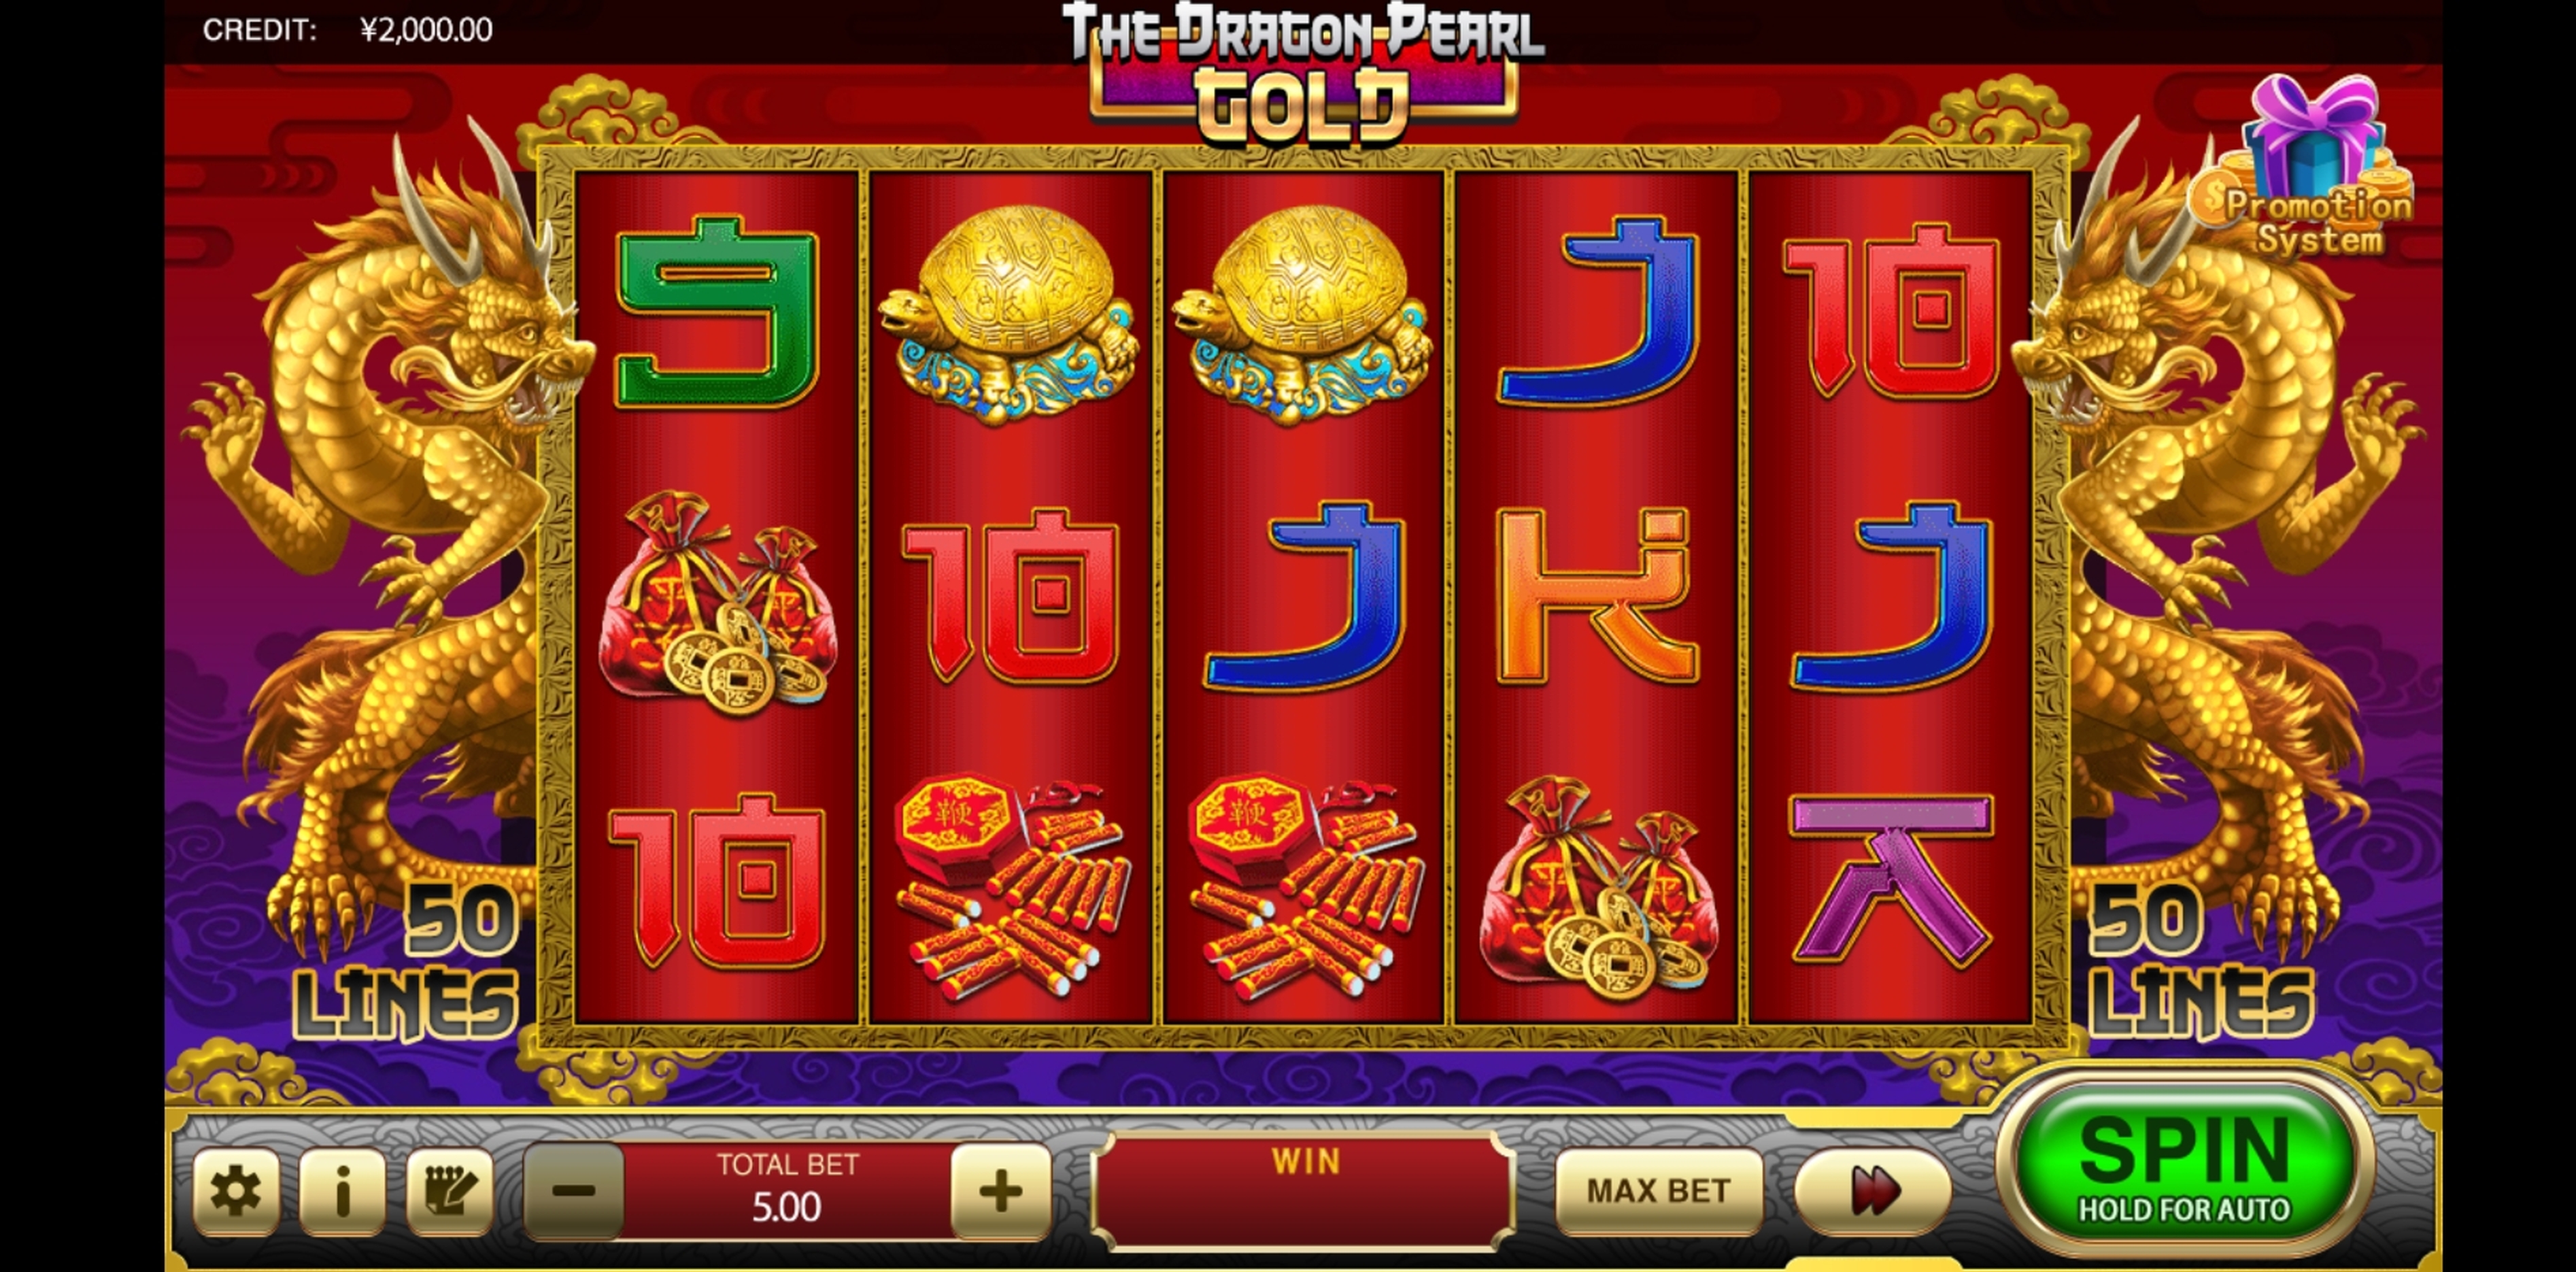 Reels in The Dragon Pearl Gold Slot Game by XIN Gaming